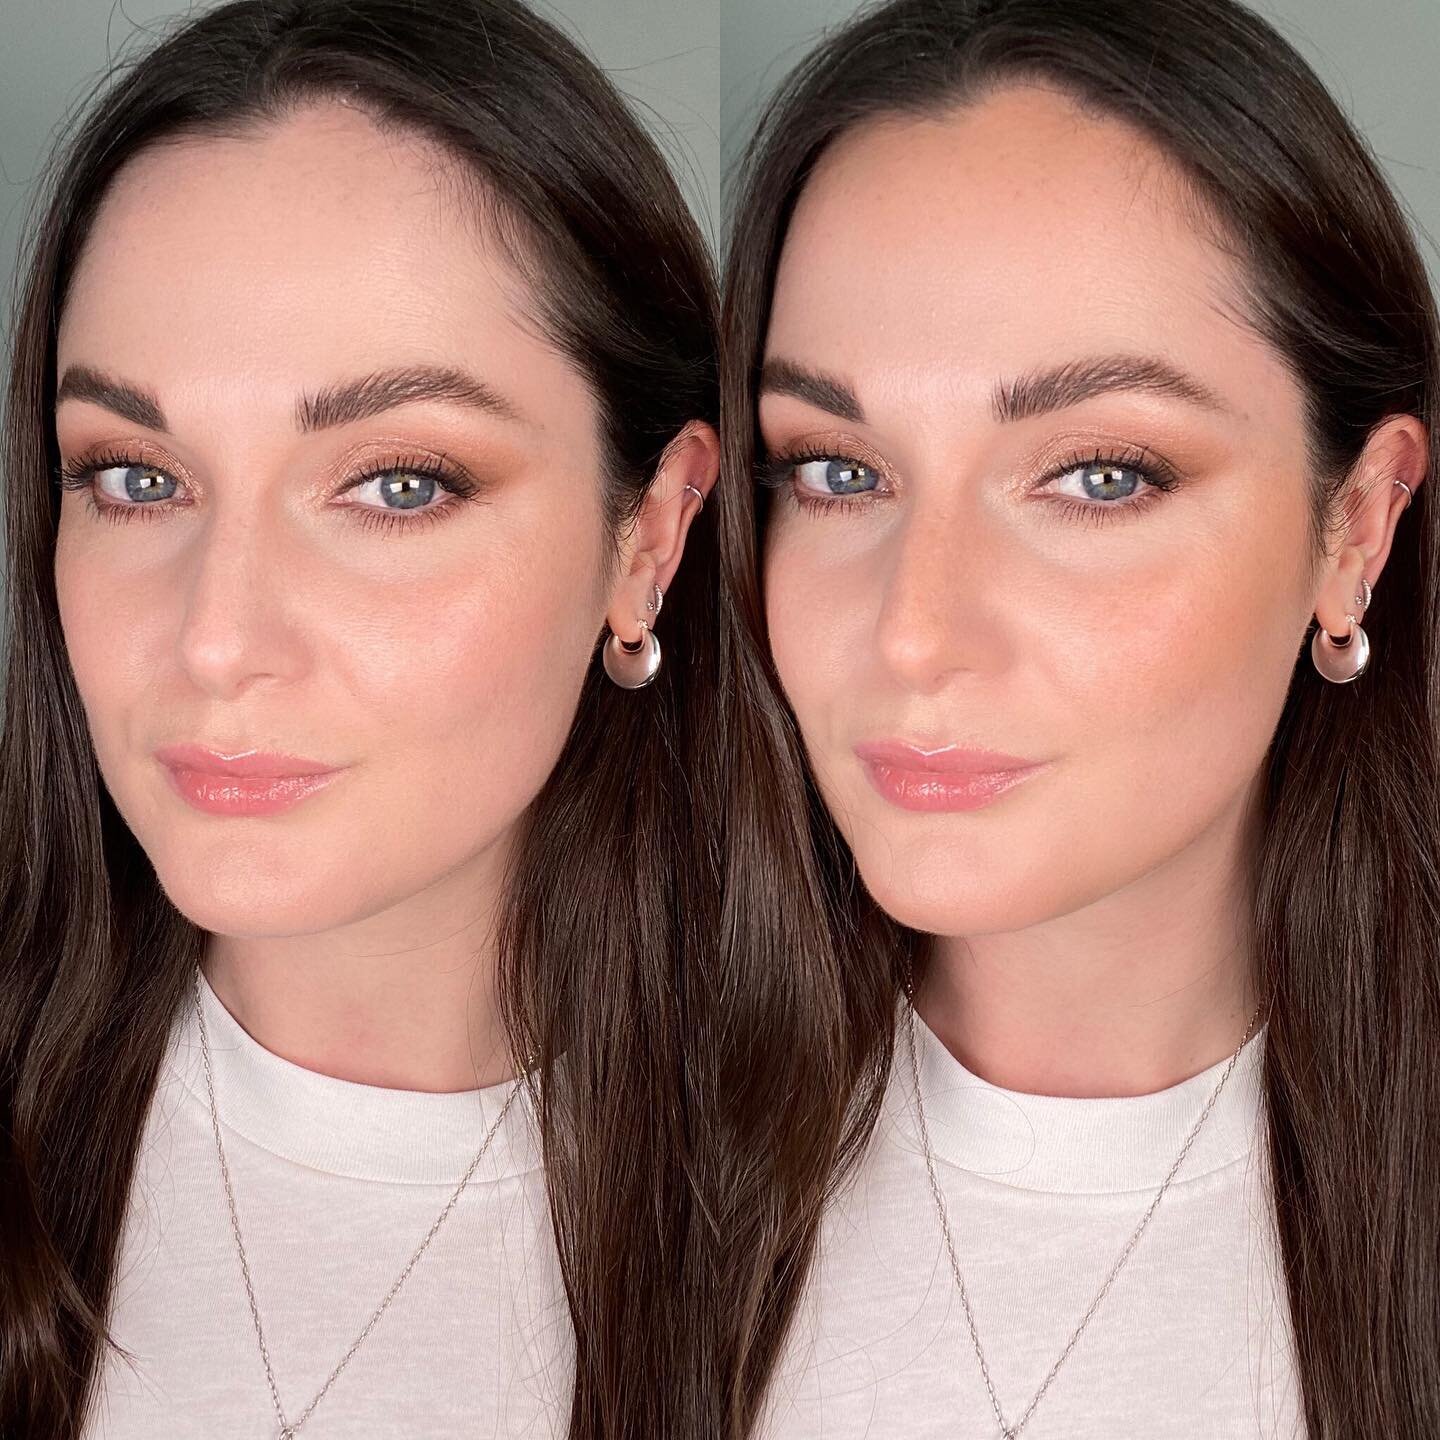 The magic of a bronzer! Subtle contour and warmth with the airbrush bronzer and beautiful bronzer brush 👌🏻 #summermakeup #airbrushbronzer #charlottetilbury